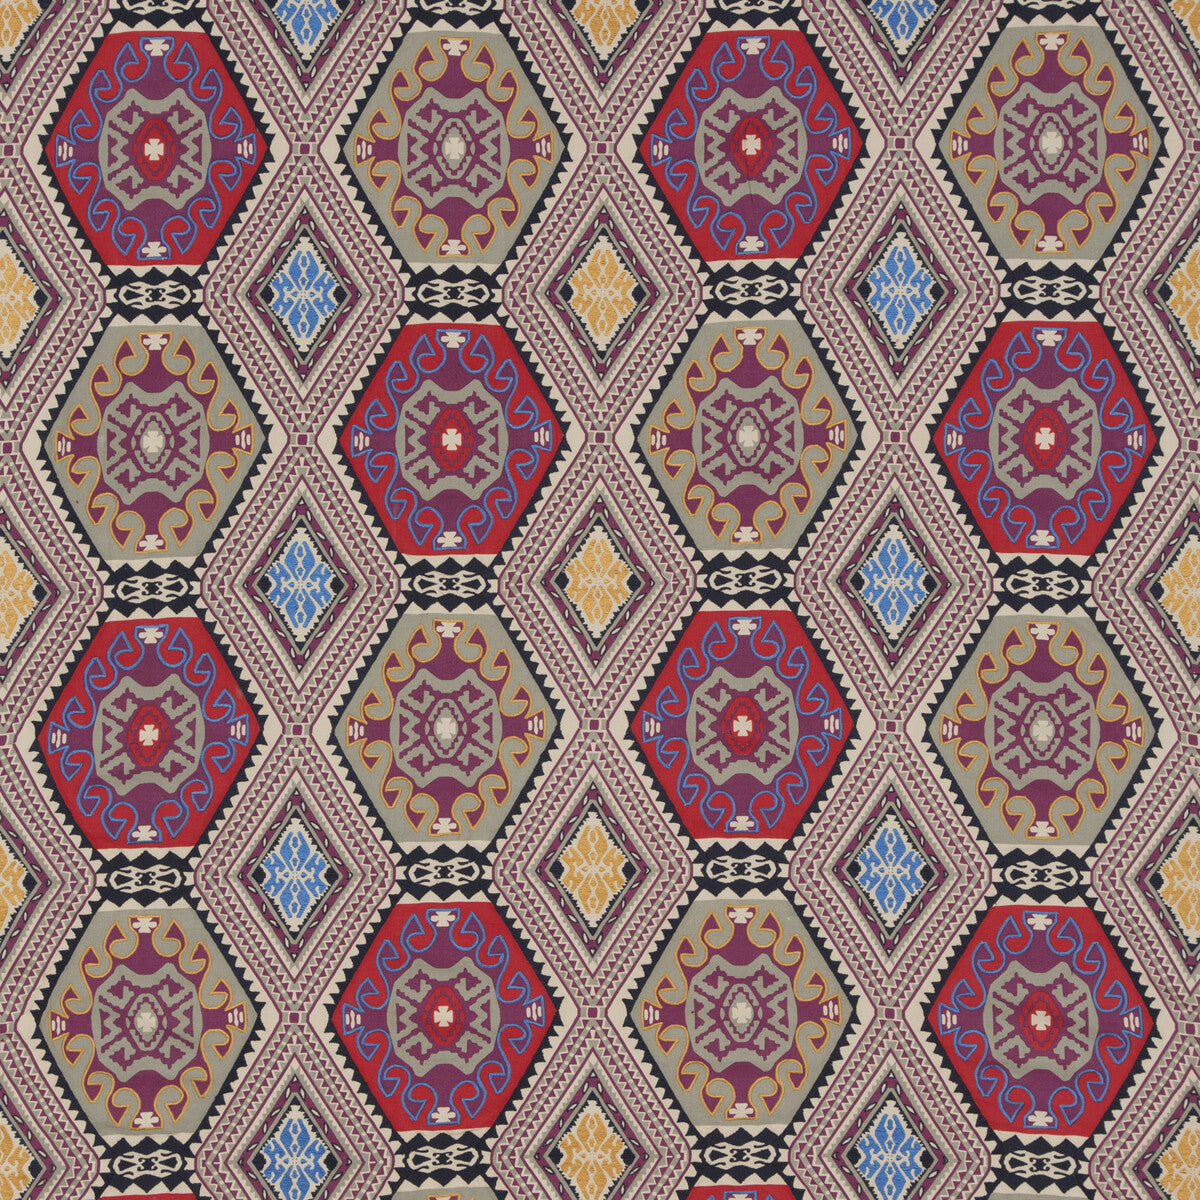 Magic Carpet fabric in plum color - pattern FD283.H113.0 - by Mulberry in the Bohemian Travels collection